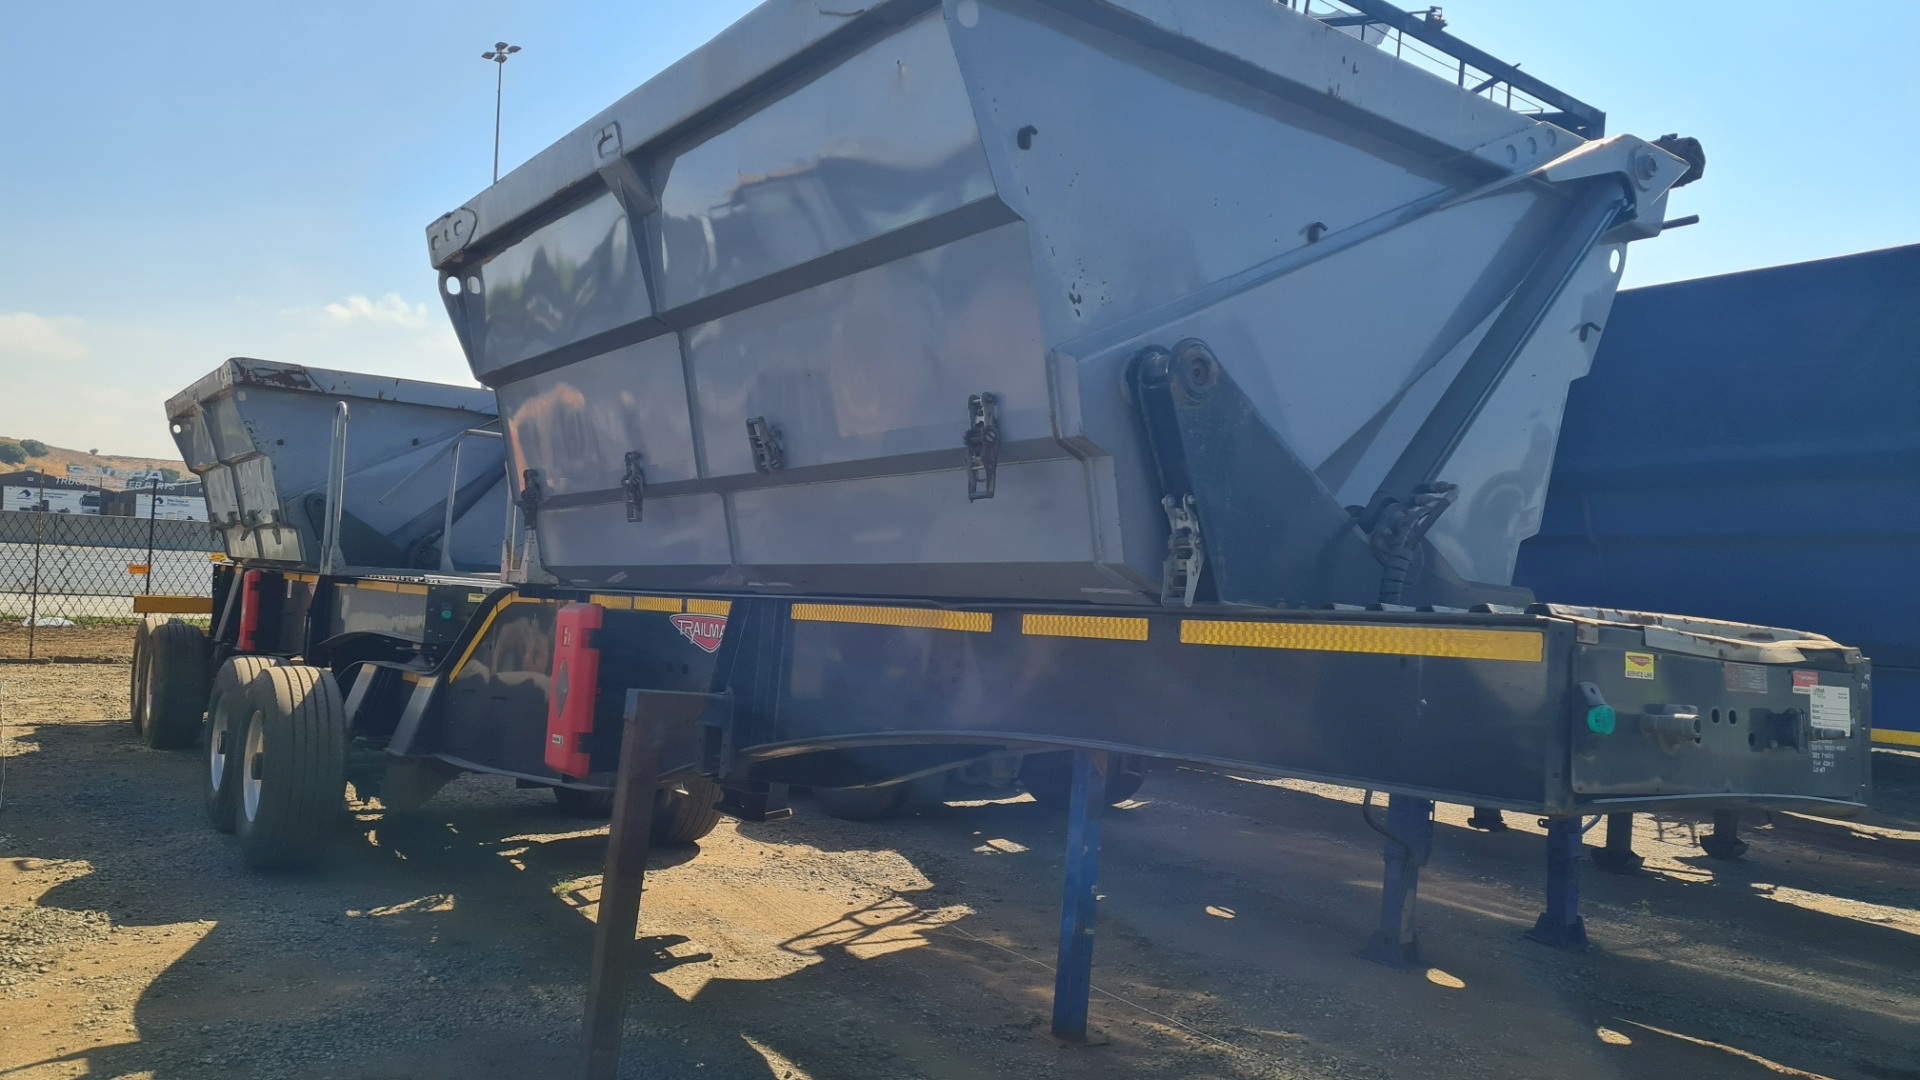 Trailmax Trailers Side tipper 20m3 Side Tip Link 2021 for sale by Benetrax Machinery | Truck & Trailer Marketplace